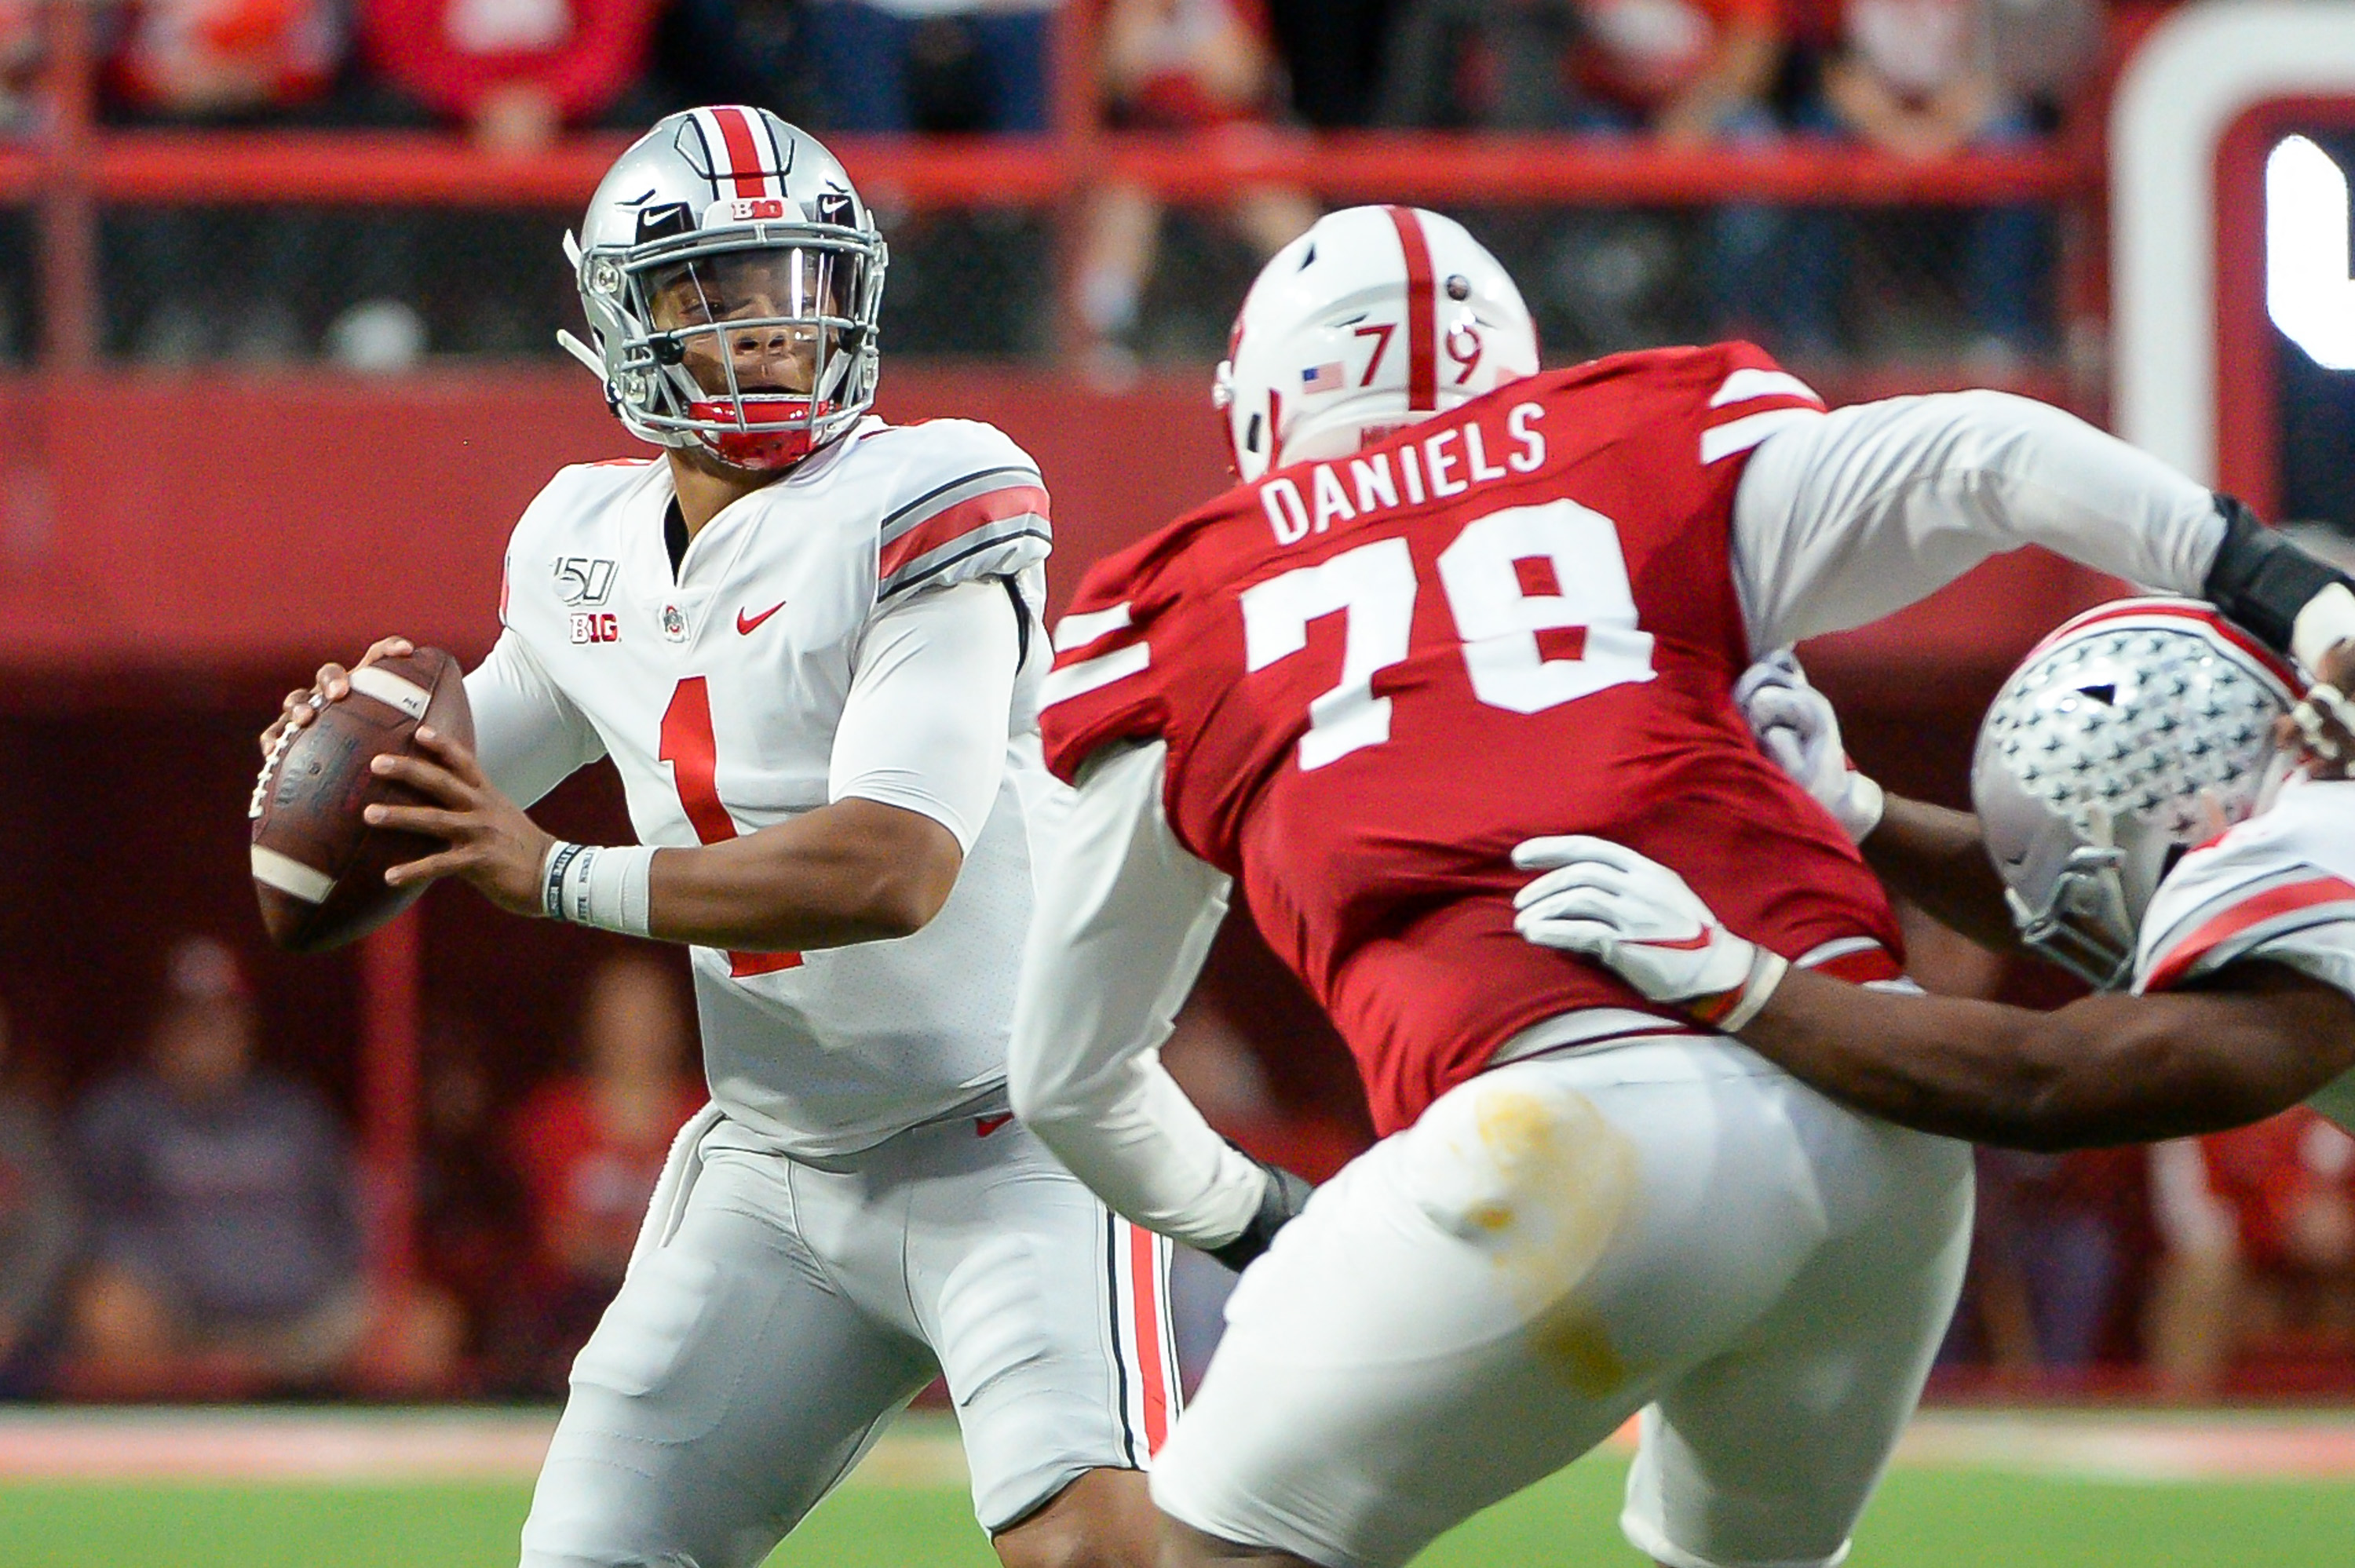 LINCOLN, NE - SEPTEMBER 28: Quarterback Justin Fields #1 of the Ohio State Buckeyes passes ahead of the rush from defensive lineman Darrion Daniels #79 of the Nebraska Cornhuskers at Memorial Stadium on September 28, 2019 in Lincoln, Nebraska.   Steven Branscombe/Getty Images/AFP (Photo by Steven Branscombe / GETTY IMAGES NORTH AMERICA / Getty Images via AFP)